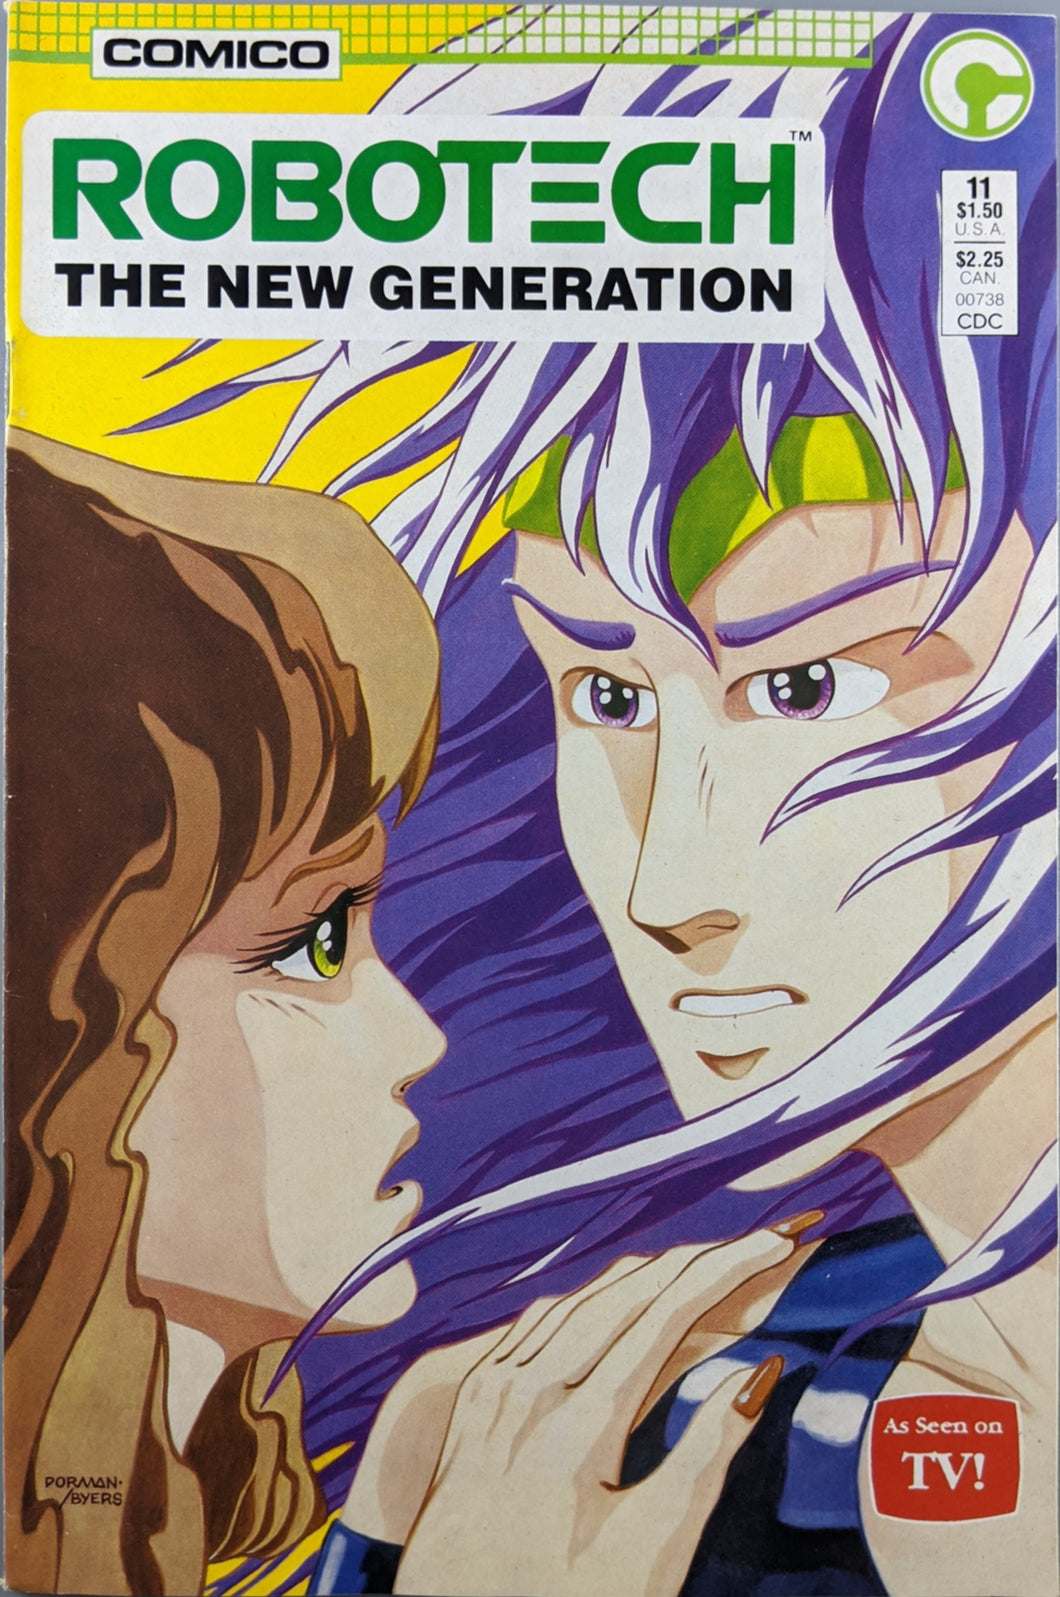 Robotech The New Generation (1985) #11